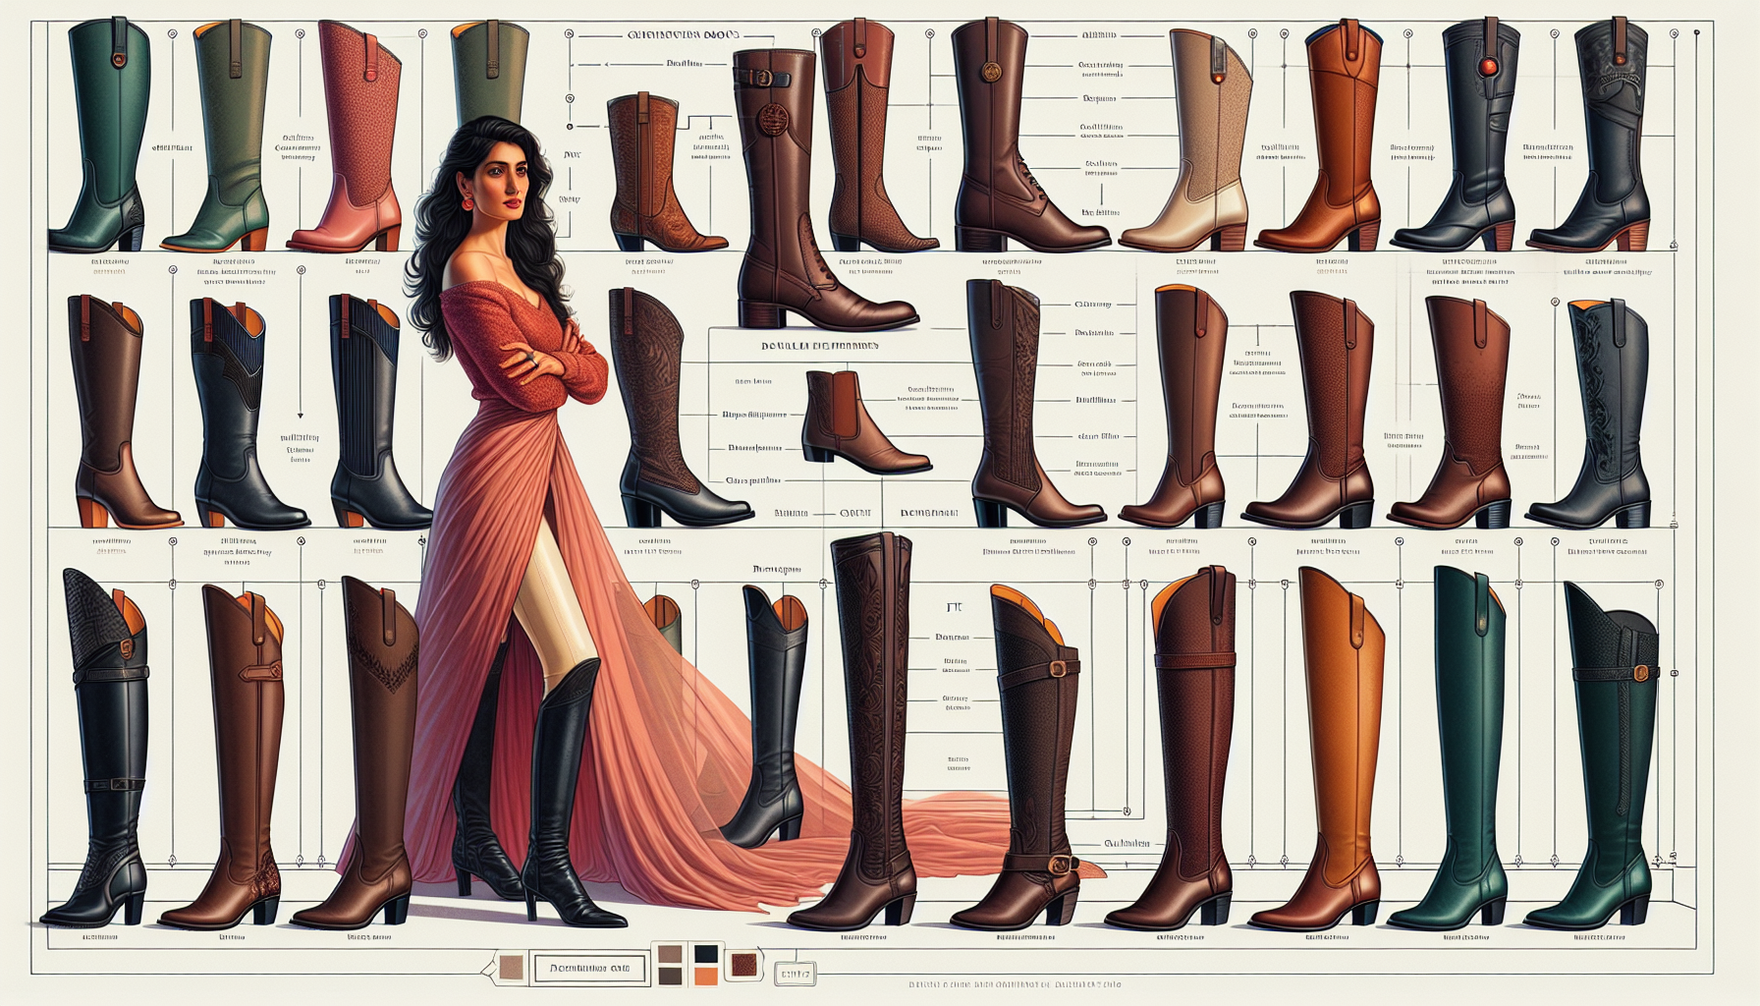 A detailed and beautifully illustrated visual guide for selecting the perfect riding boots. The image should show an array of riding boots of different styles, colors and materials, clearly arranged f